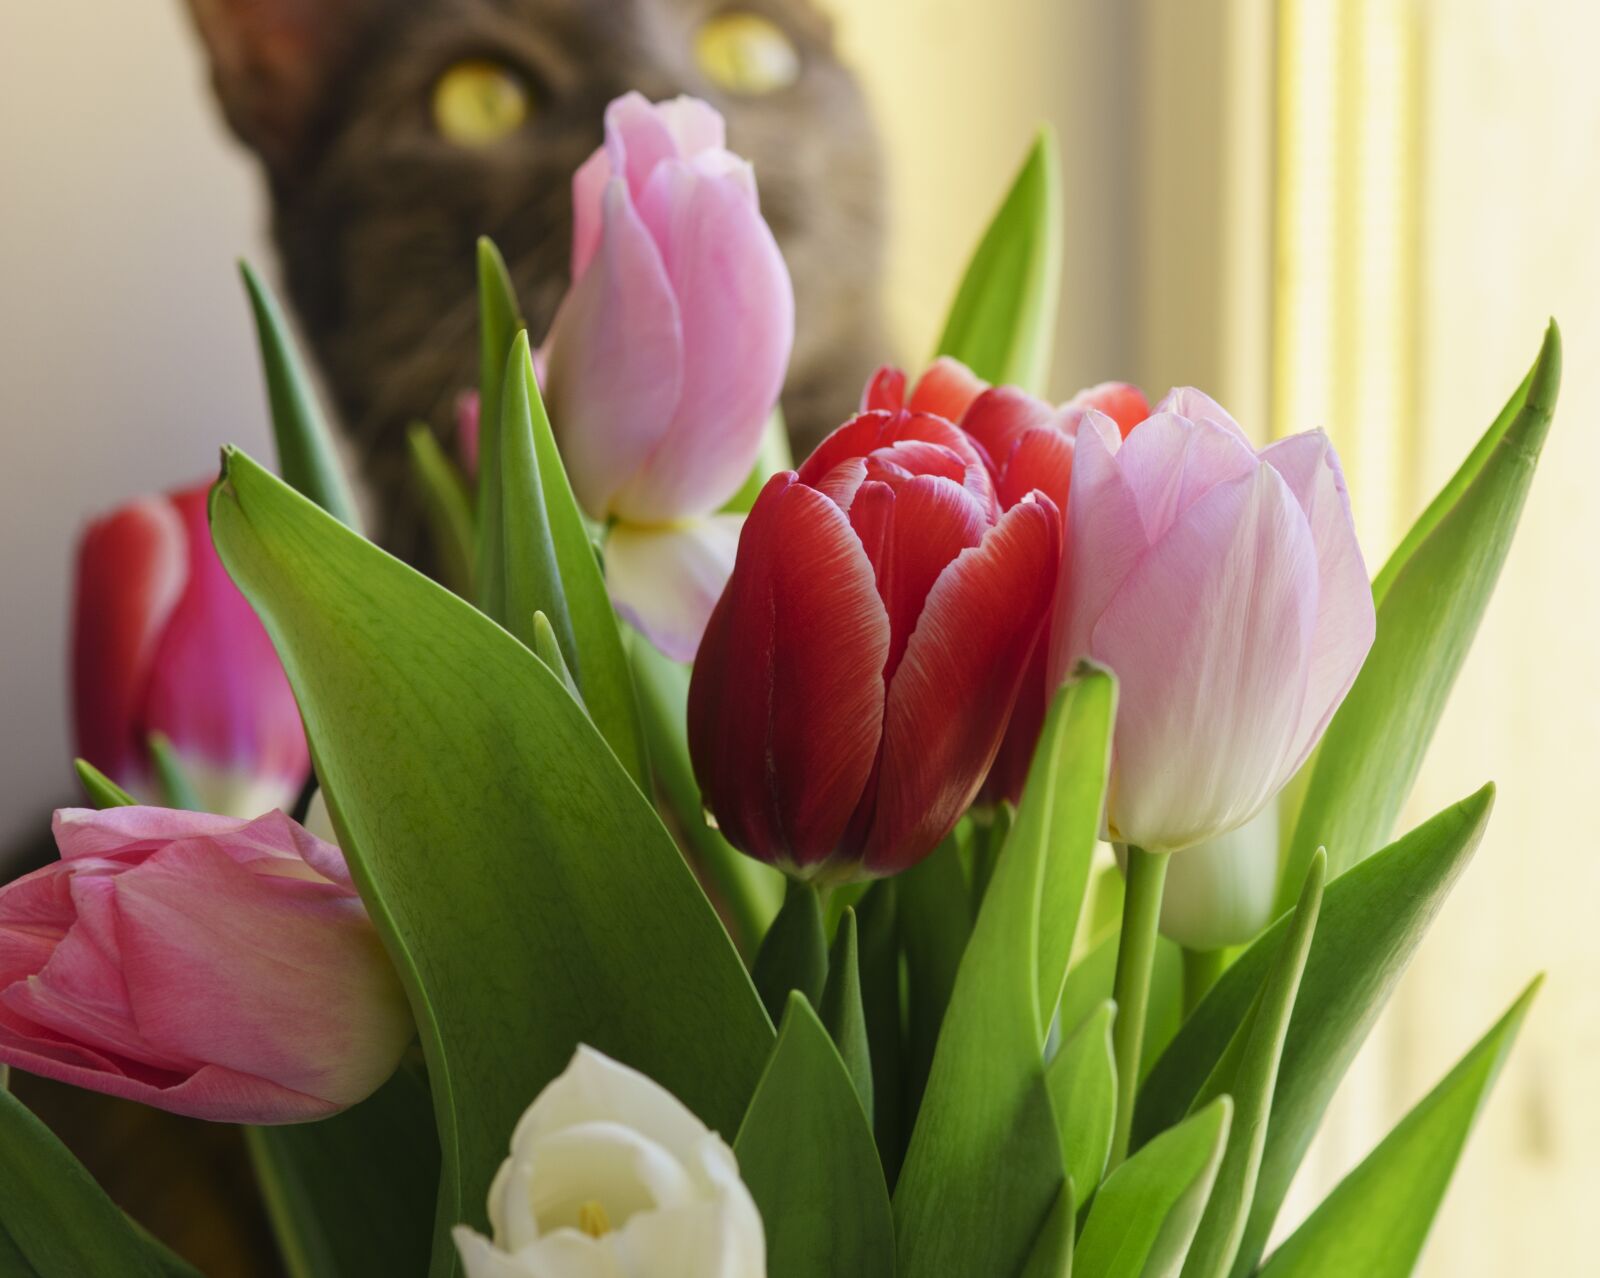 85mm F1.4 sample photo. Tulips, flowers, spring photography